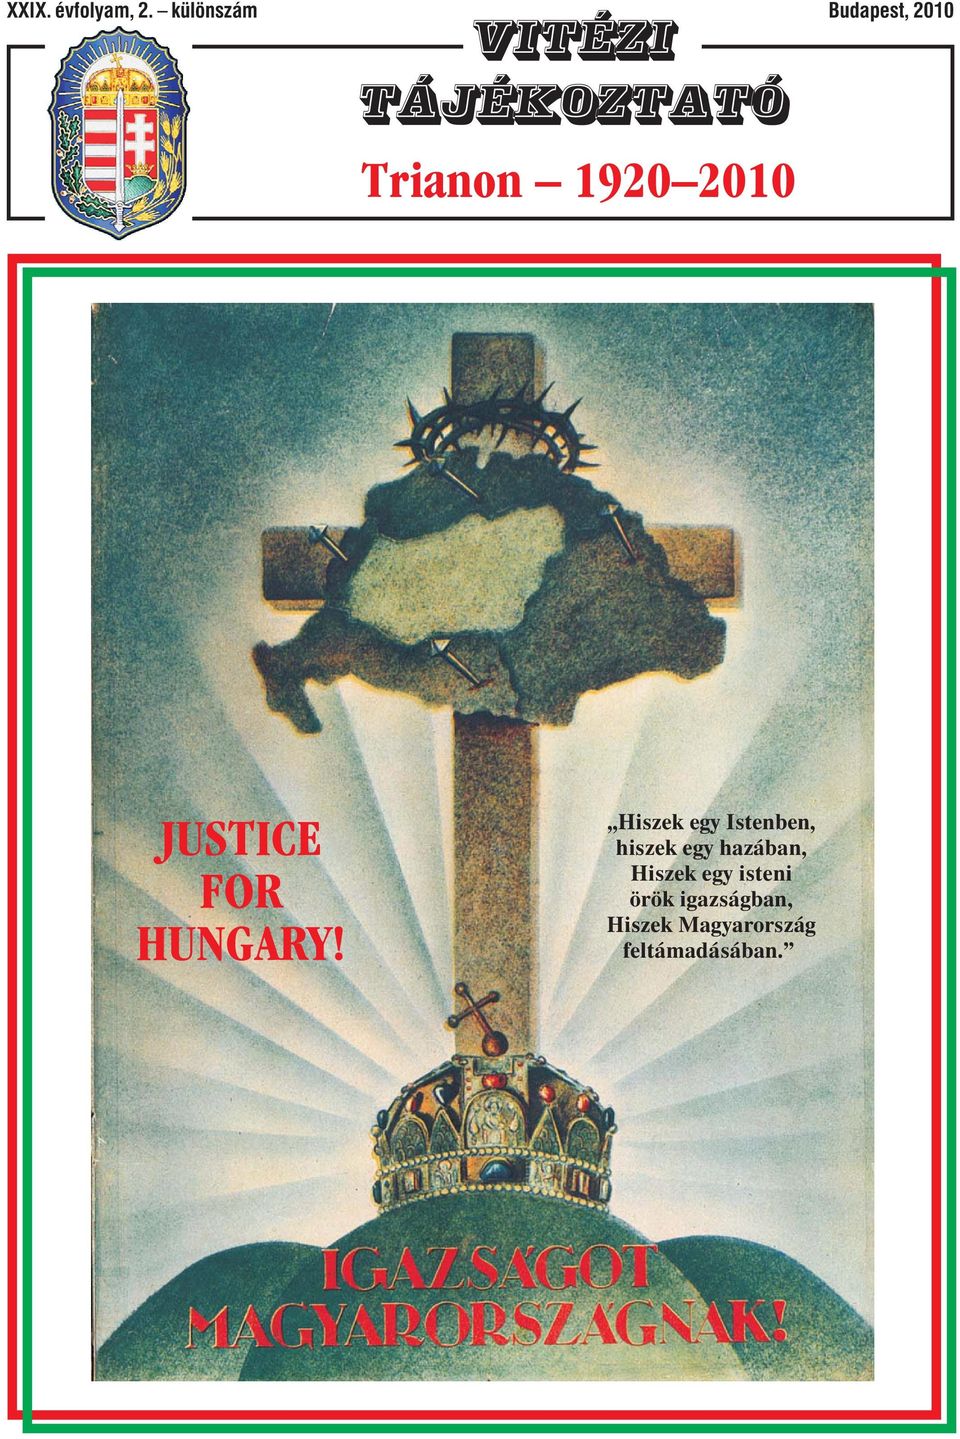 JUSTICE FOR HUNGARY!